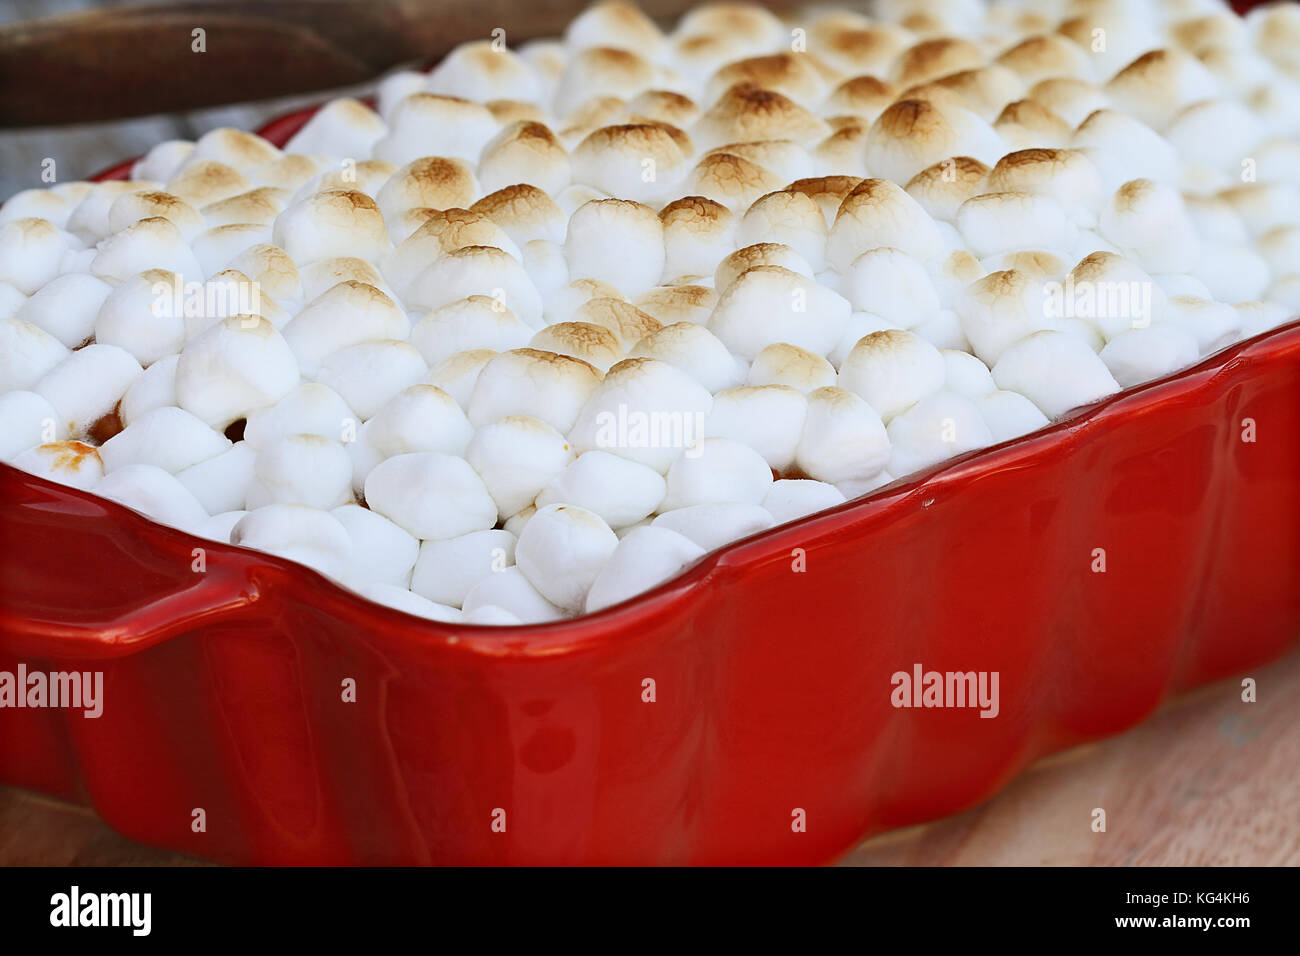 Sweet Potato Casserole baked with mini marshmallows ready for Thanksgiving Day. Extreme shallow depth of field with selective focus. Stock Photo